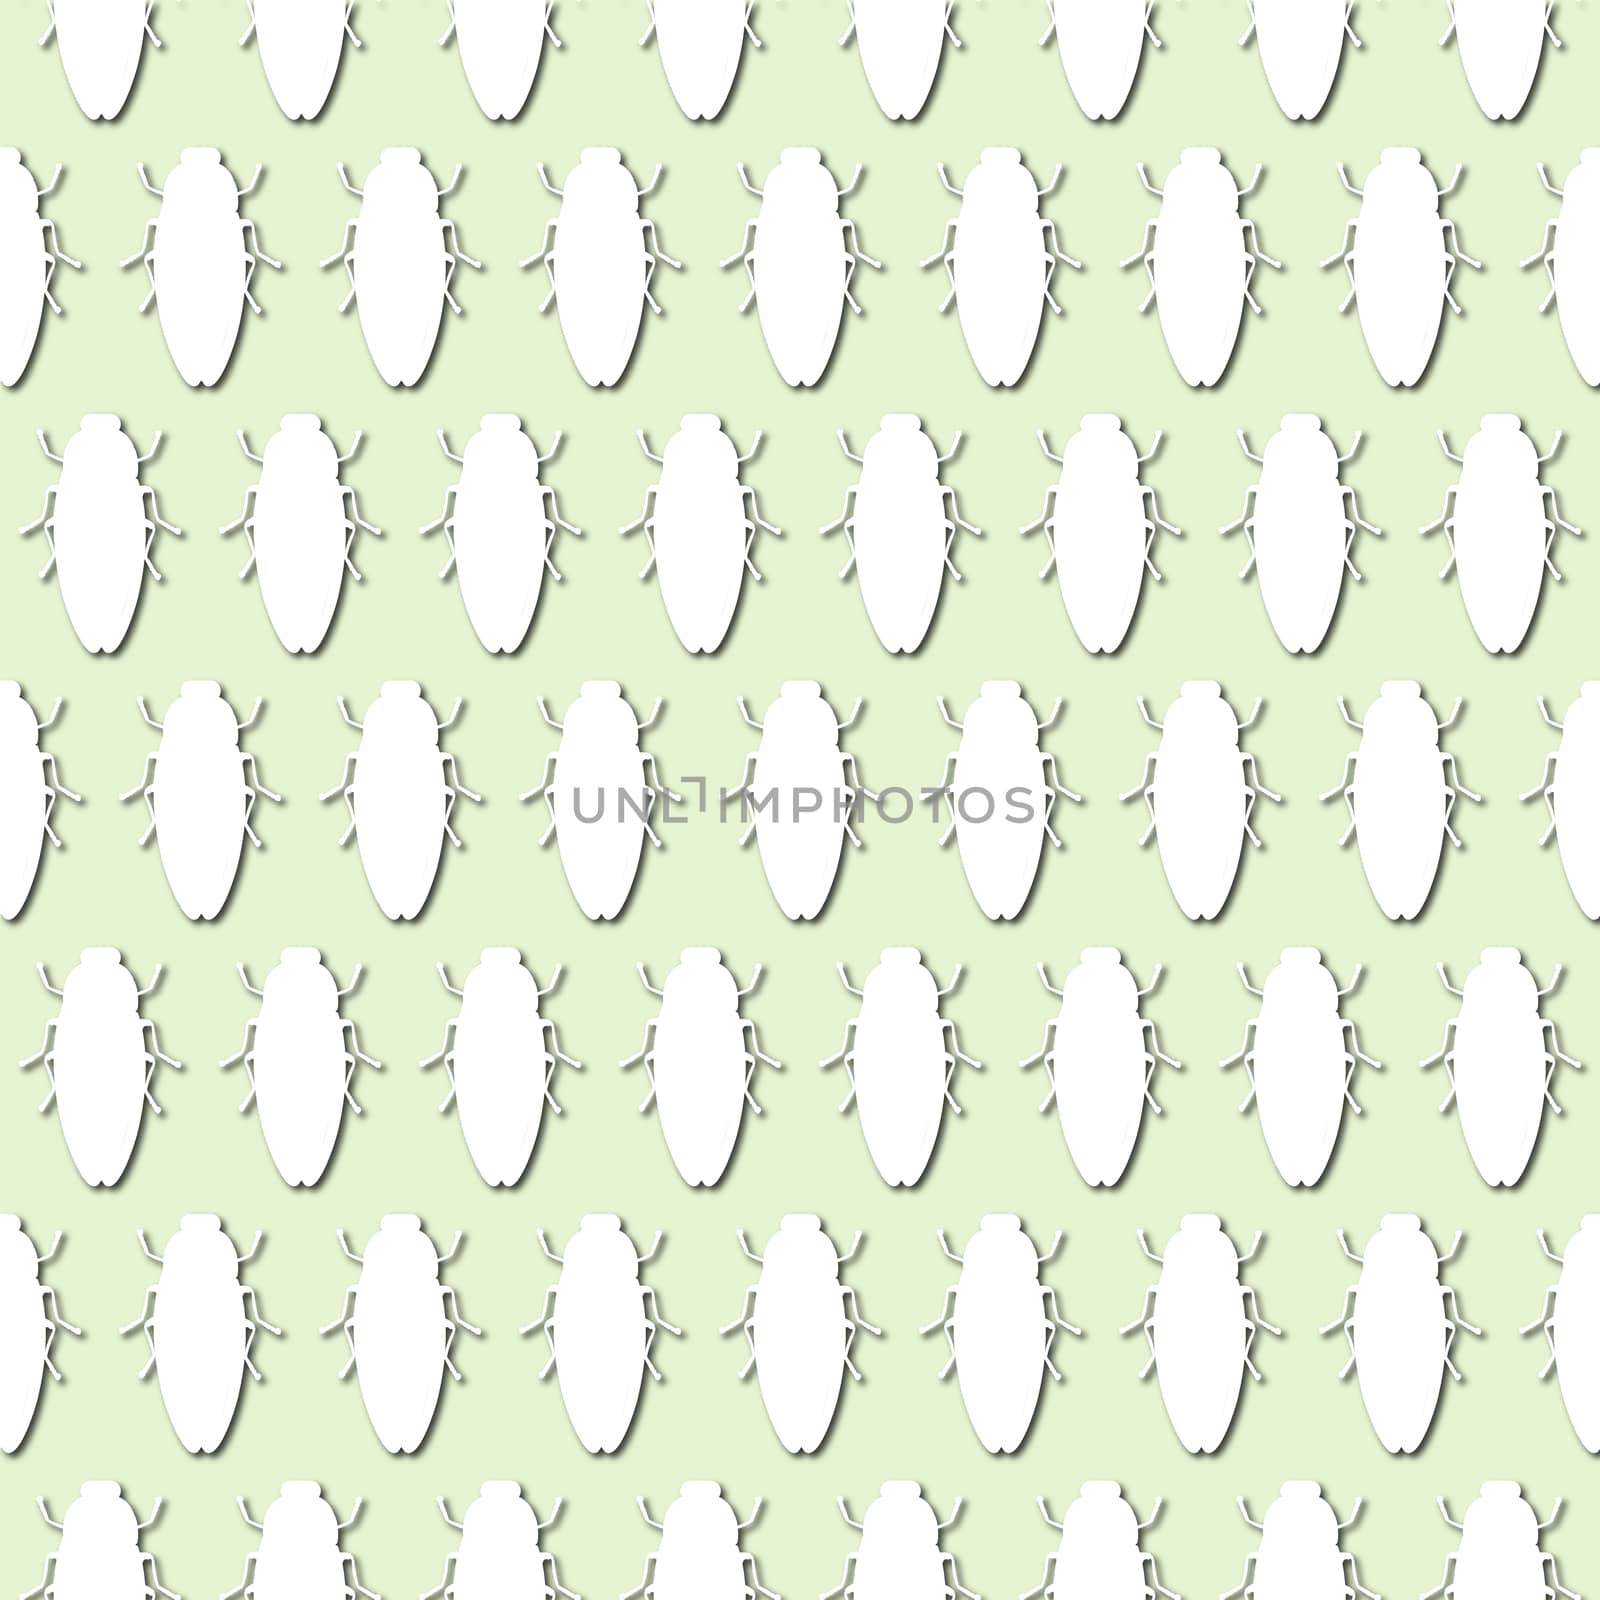 White bug, beetle silhouette on pale green background, seamless pattern. Paper cut style by Pashchenko